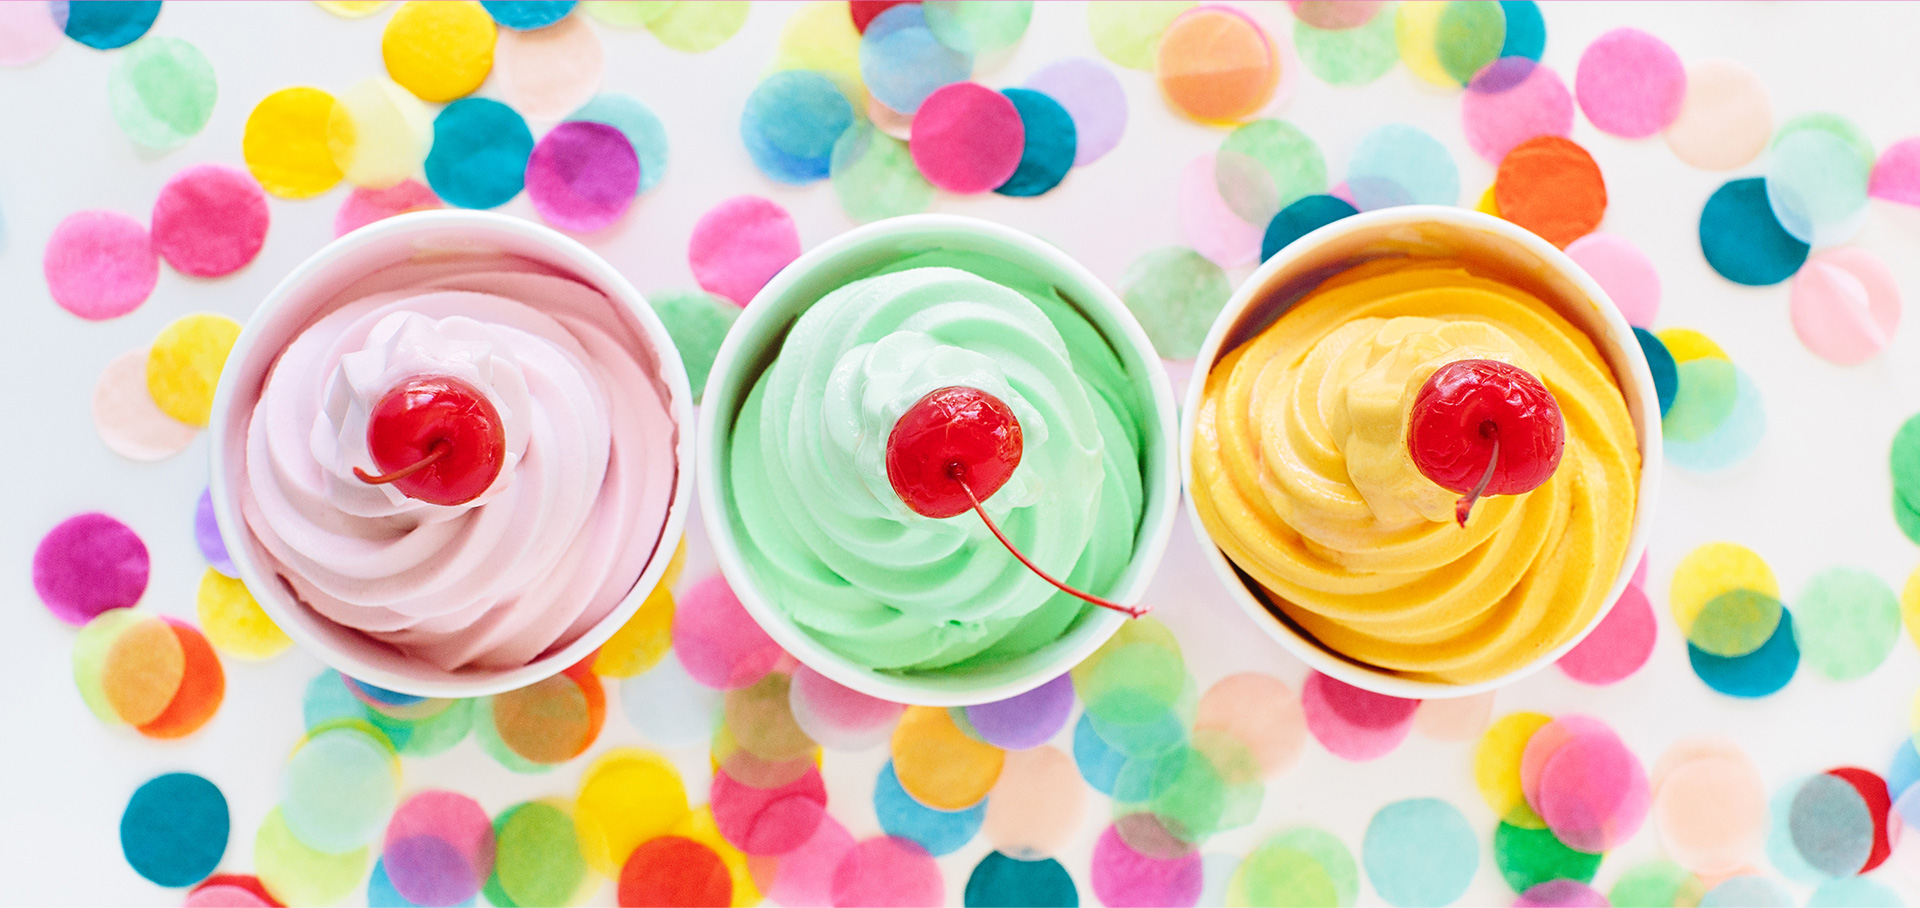 Three colorful cups of Menchie's frozen yogurt